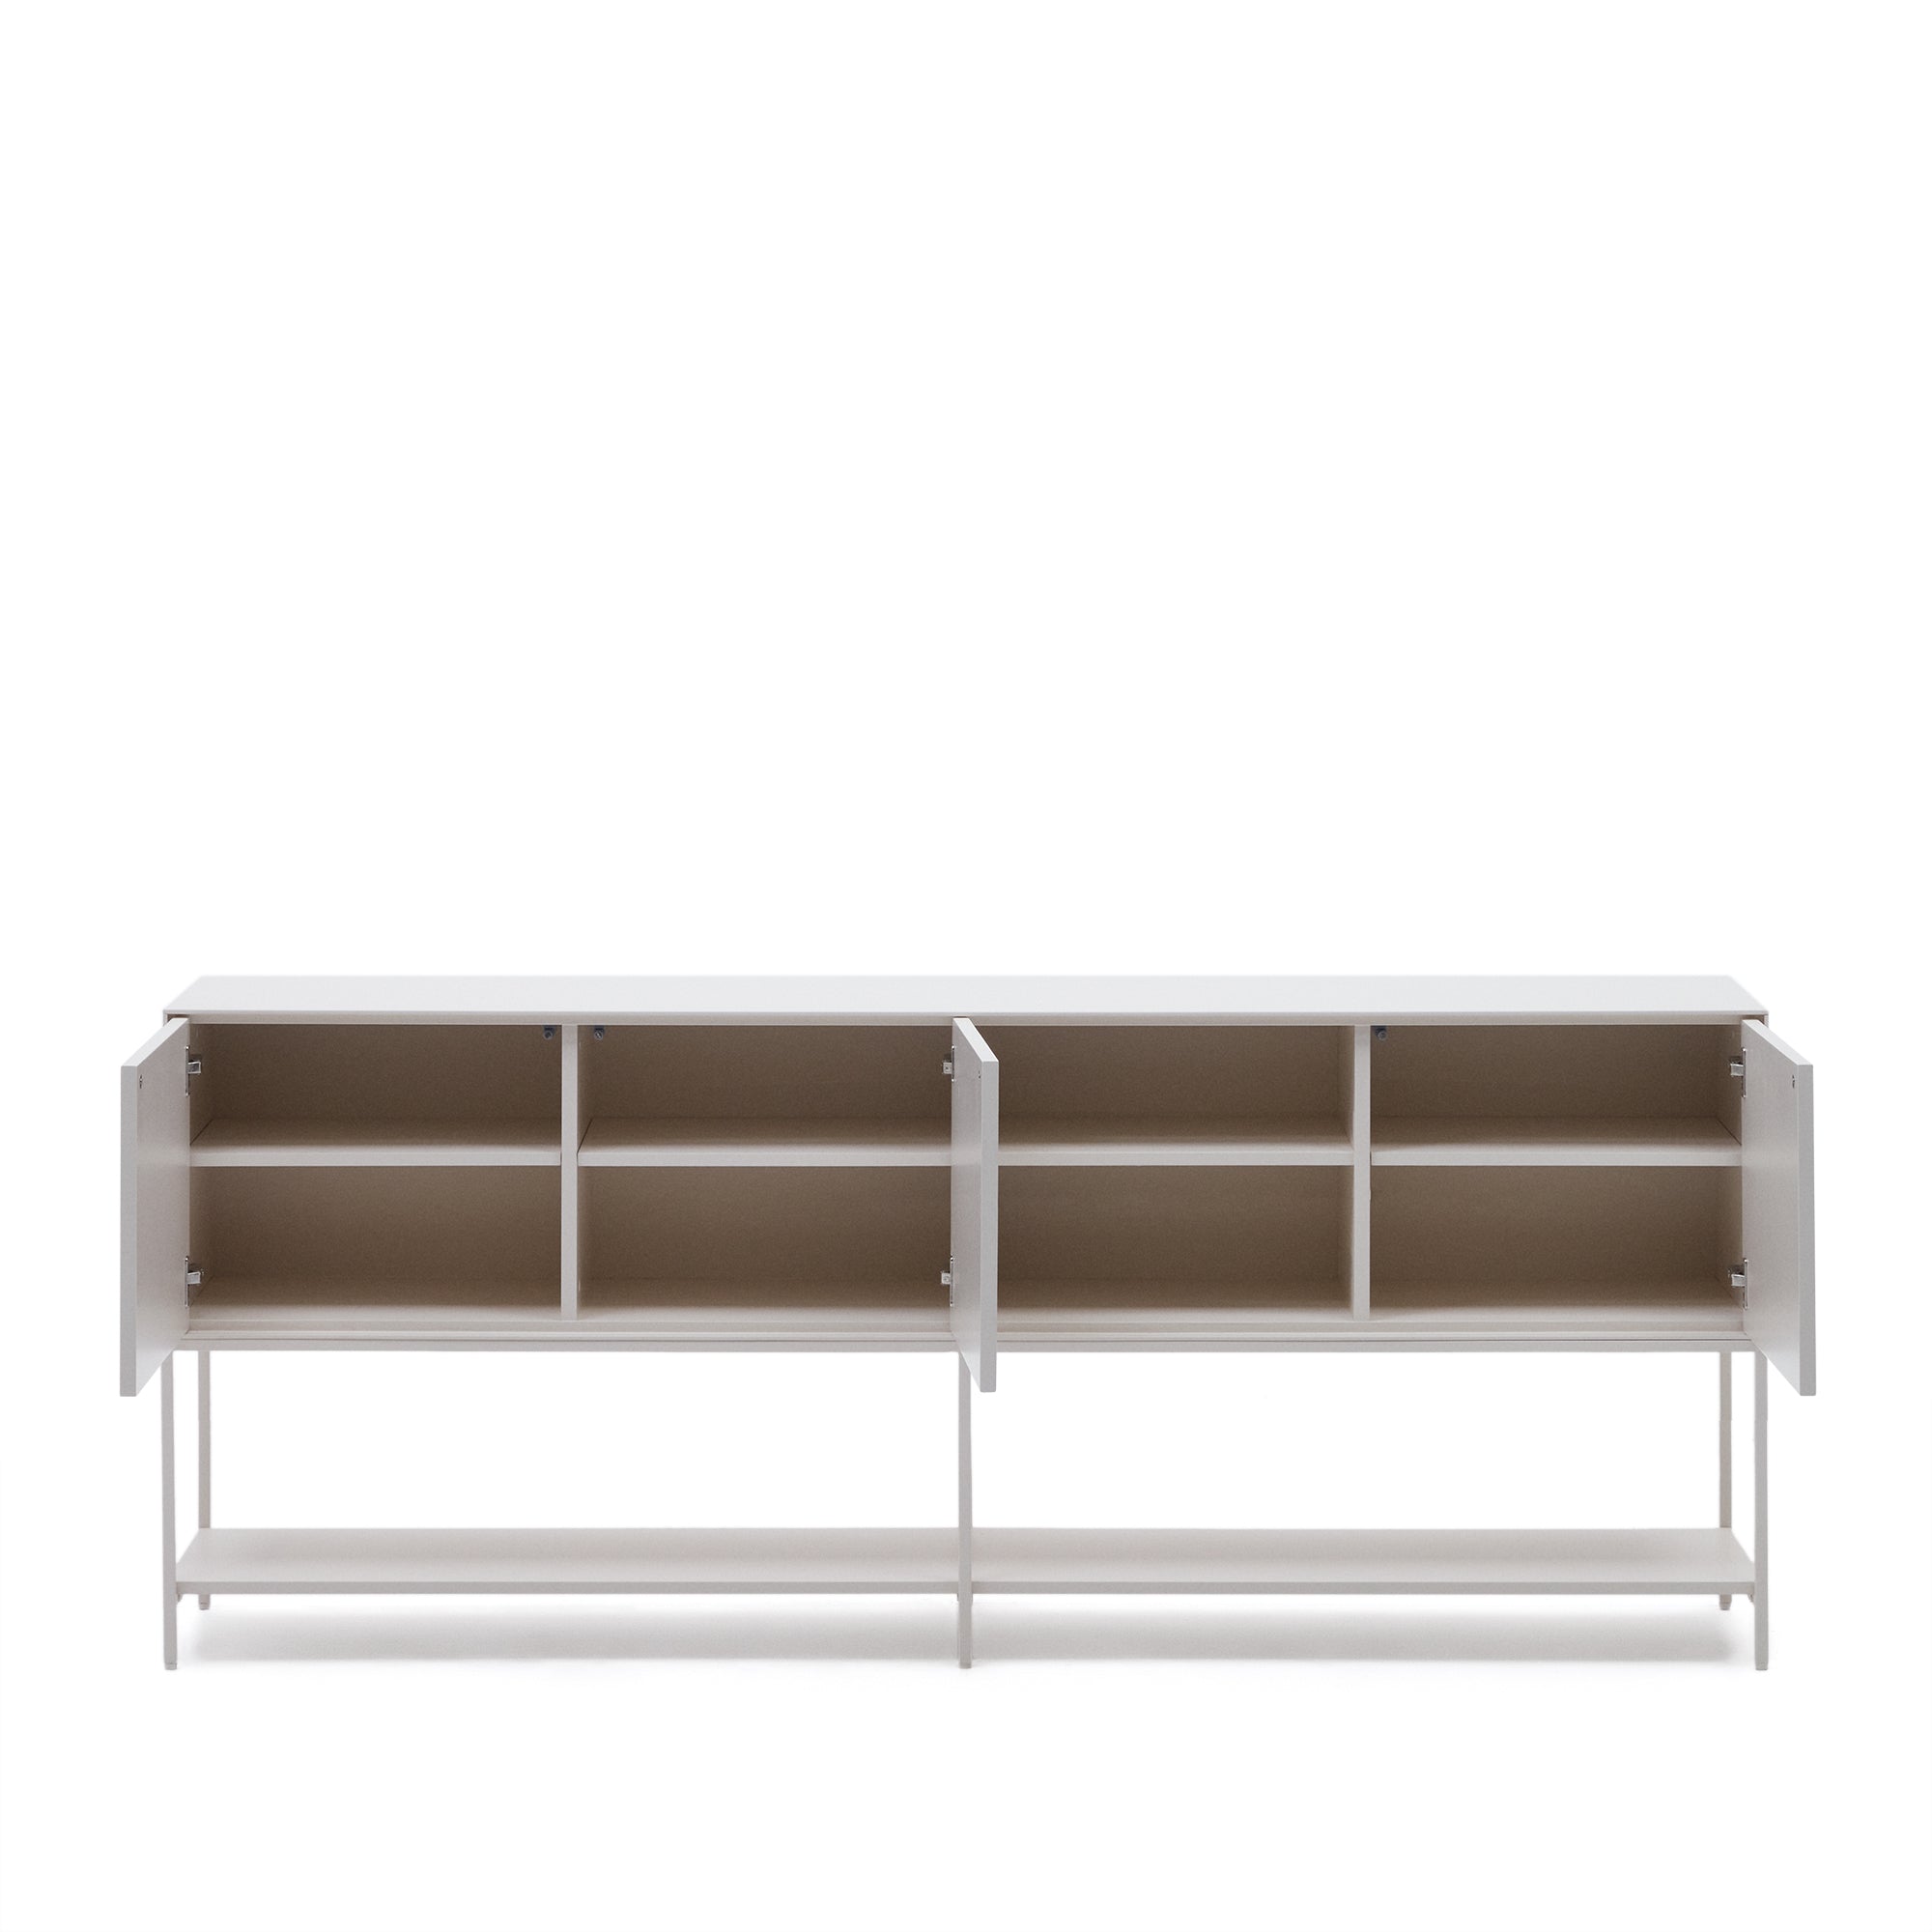 Vedrana 3-door sideboard white lacquered MDF 195 x 80 cm